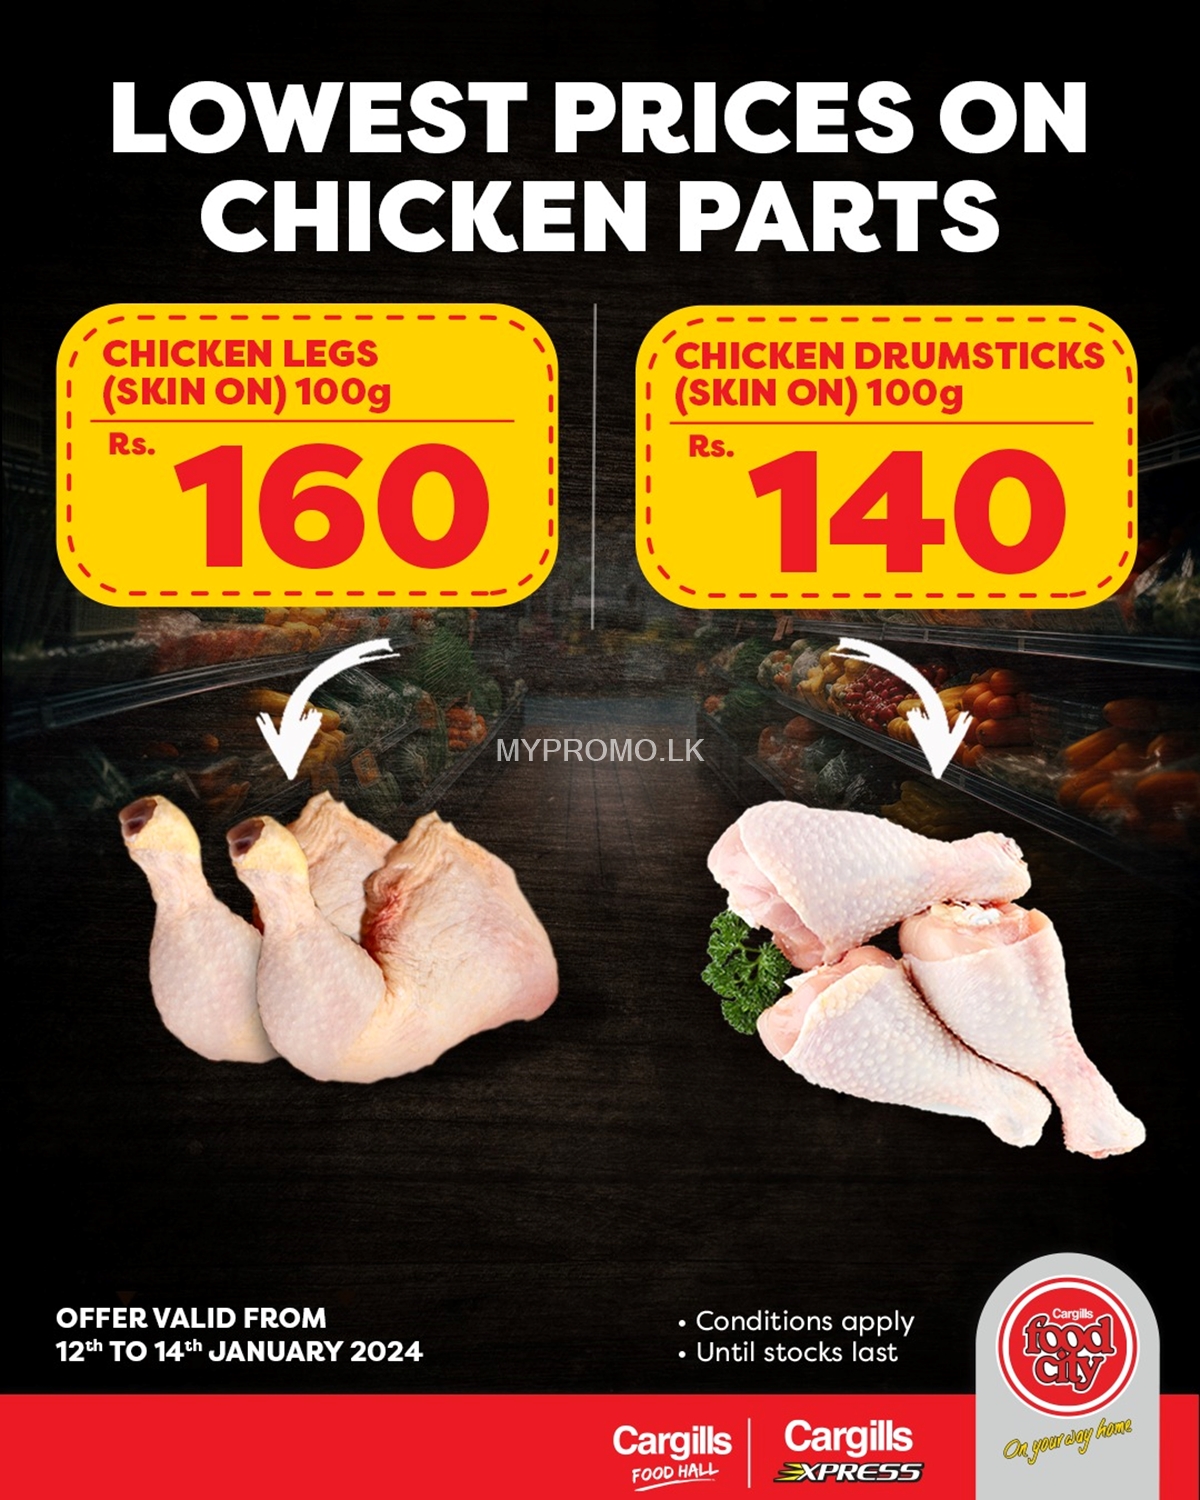 Enjoy lowest prices on chicken parts across Cargills FoodCity outlets islandwide!